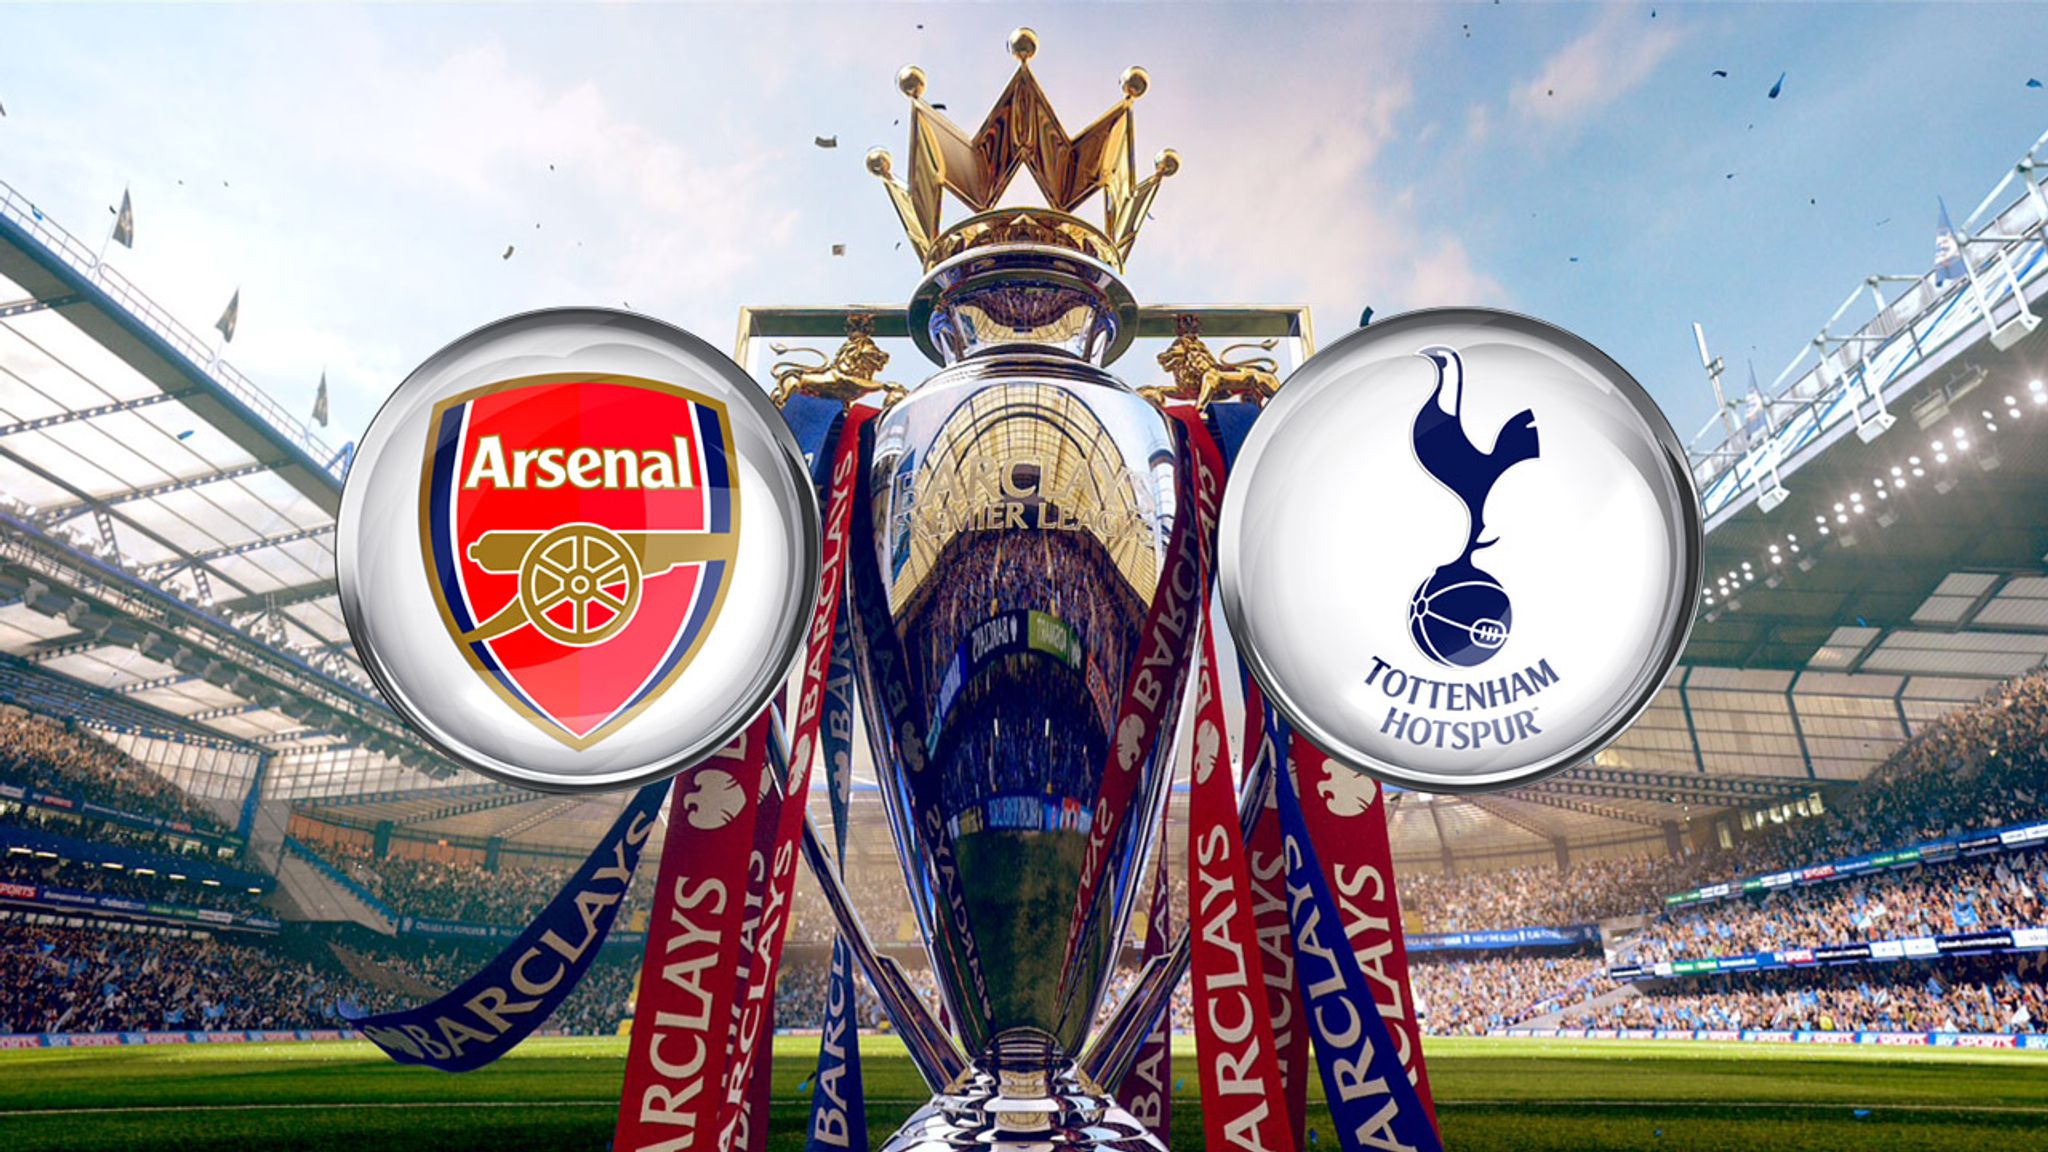 Arsenal v Tottenham Hotspur preview Gunners hoping to continue title